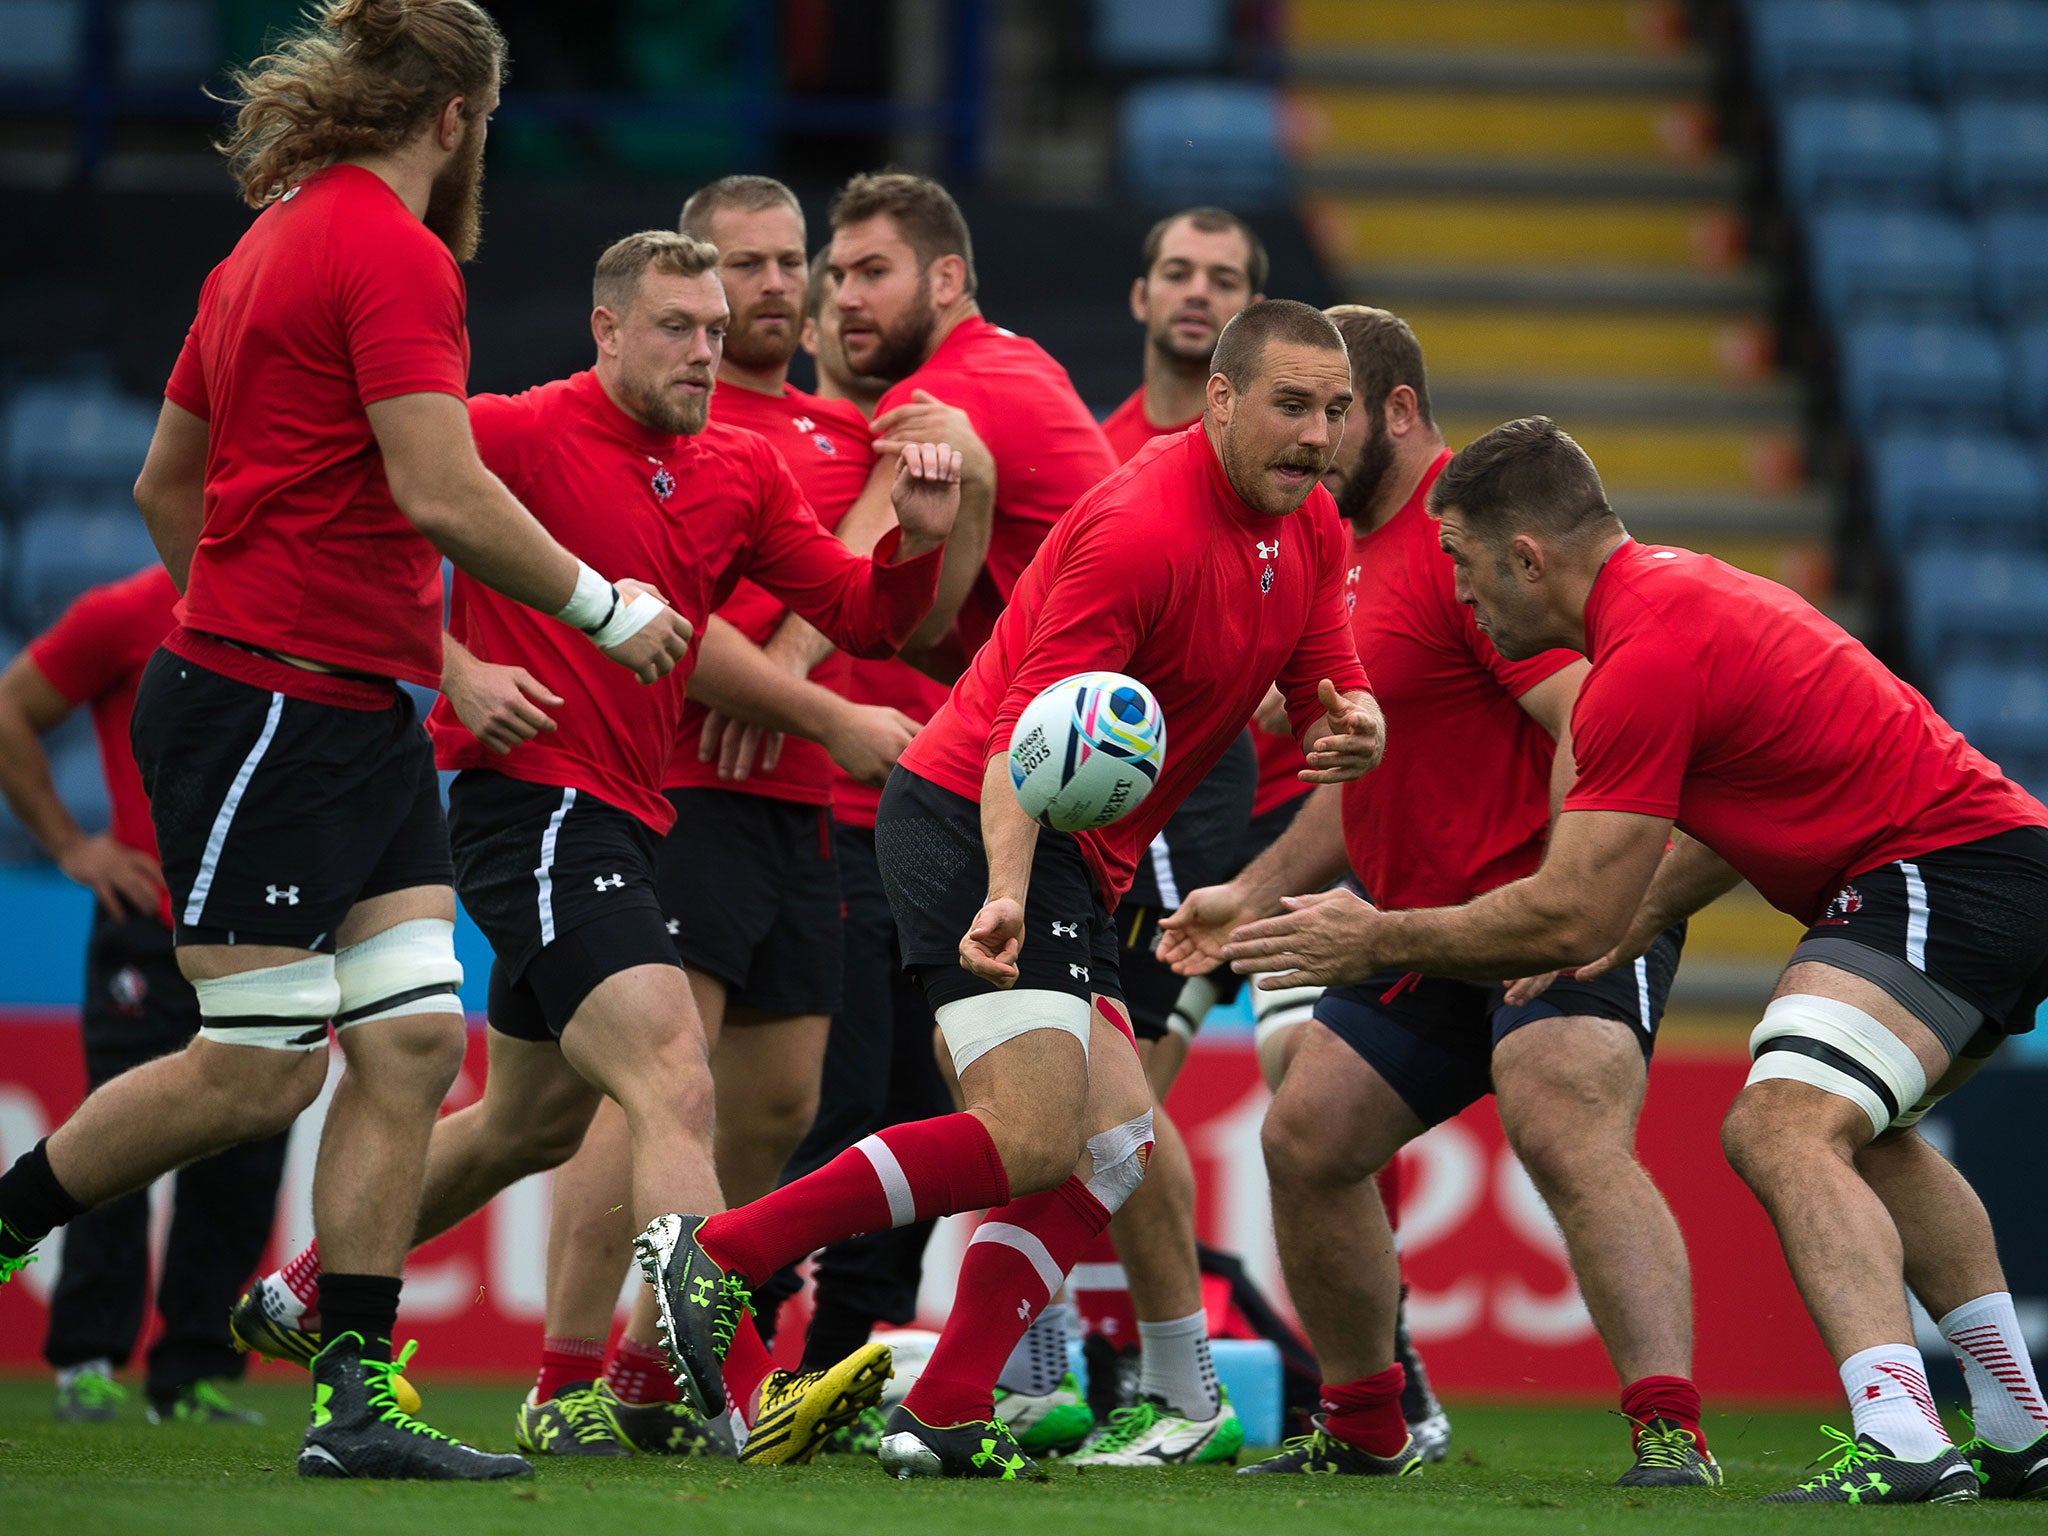 Canada lock Jamie Cudmore takes the ball during training